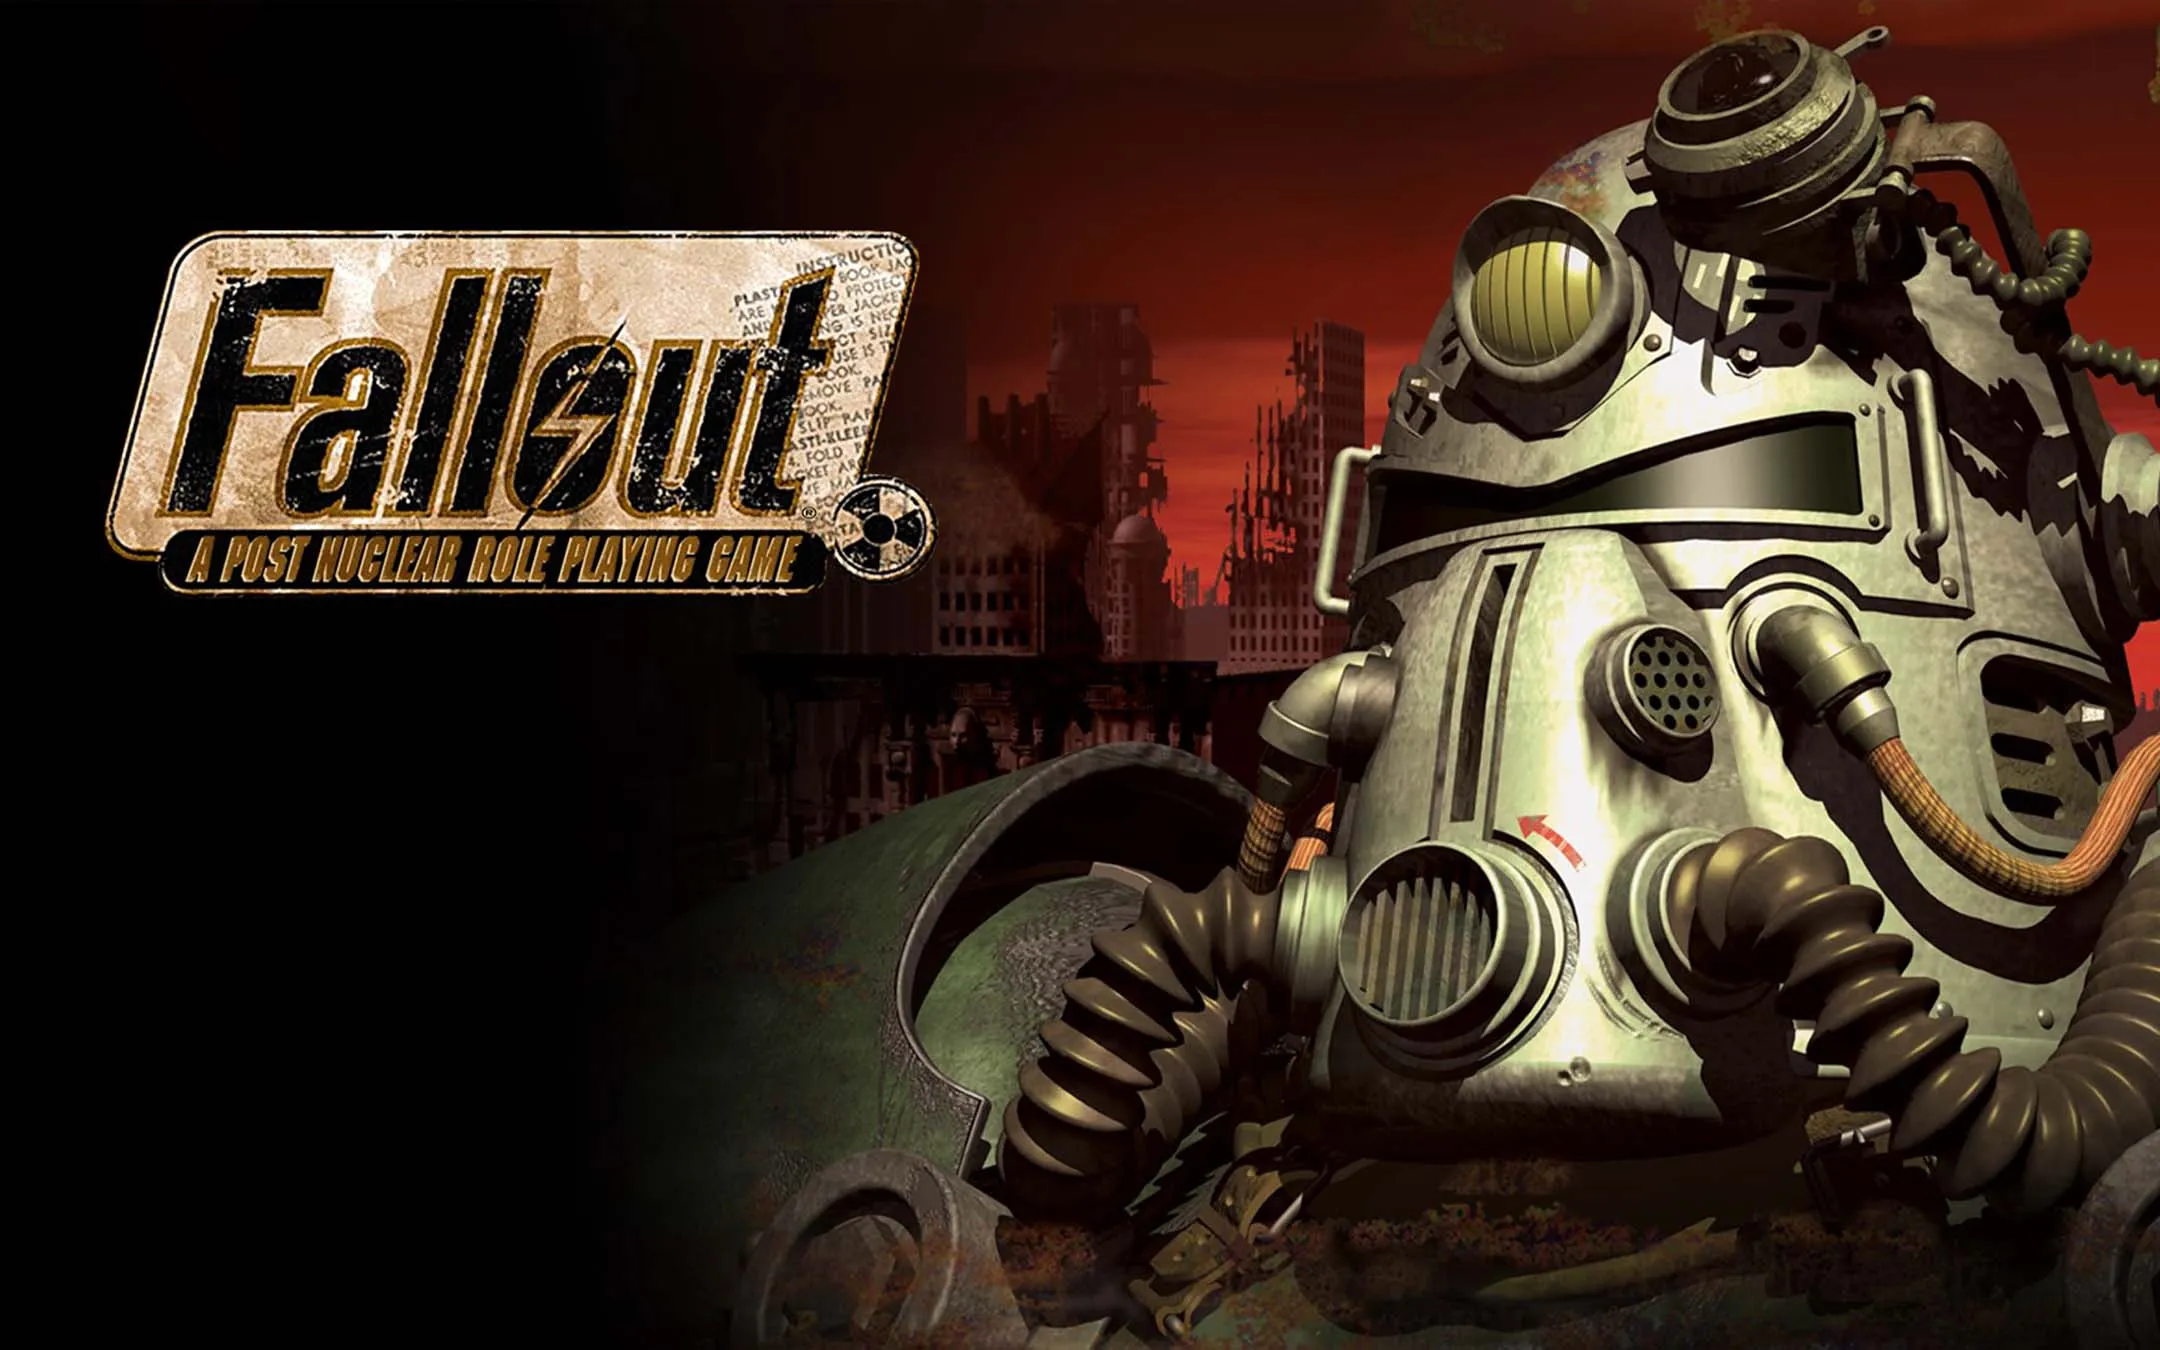 Fallout: A Post Nuclear Role Playing Game (1997)